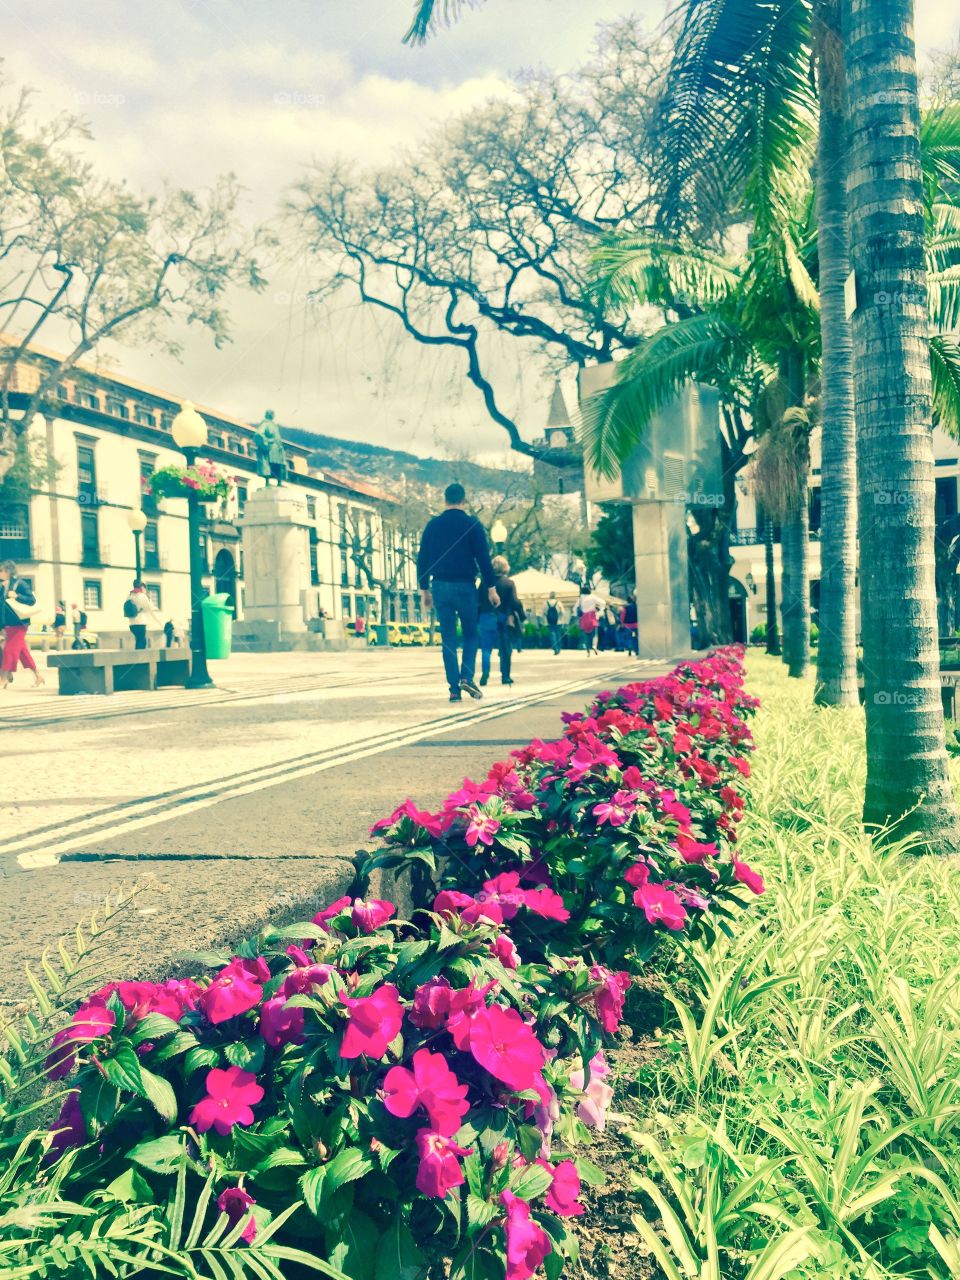 flowers on the streets of the city of Funchal, Madeira island